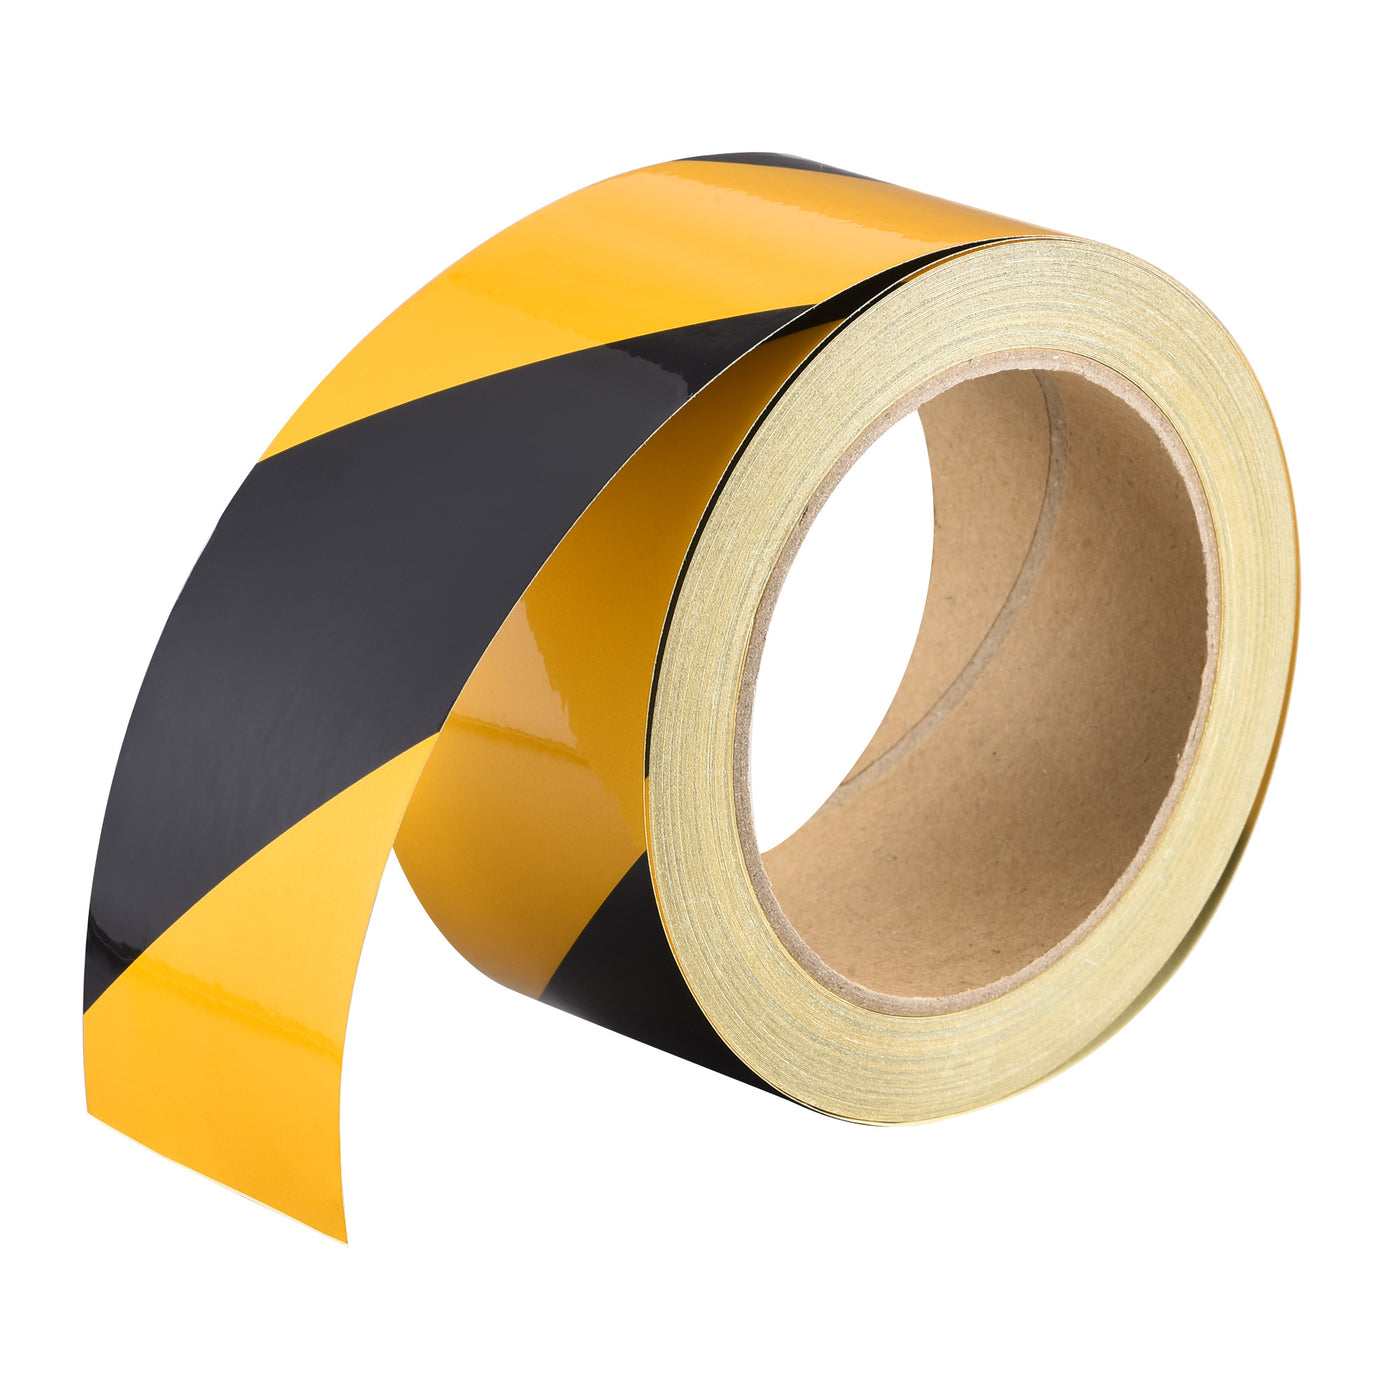 uxcell Uxcell Reflective Tape Yellow Black, 50mm x 25m, Outdoor Waterproof Warning Tape For Bikes, RV, and Boat Striping Marking